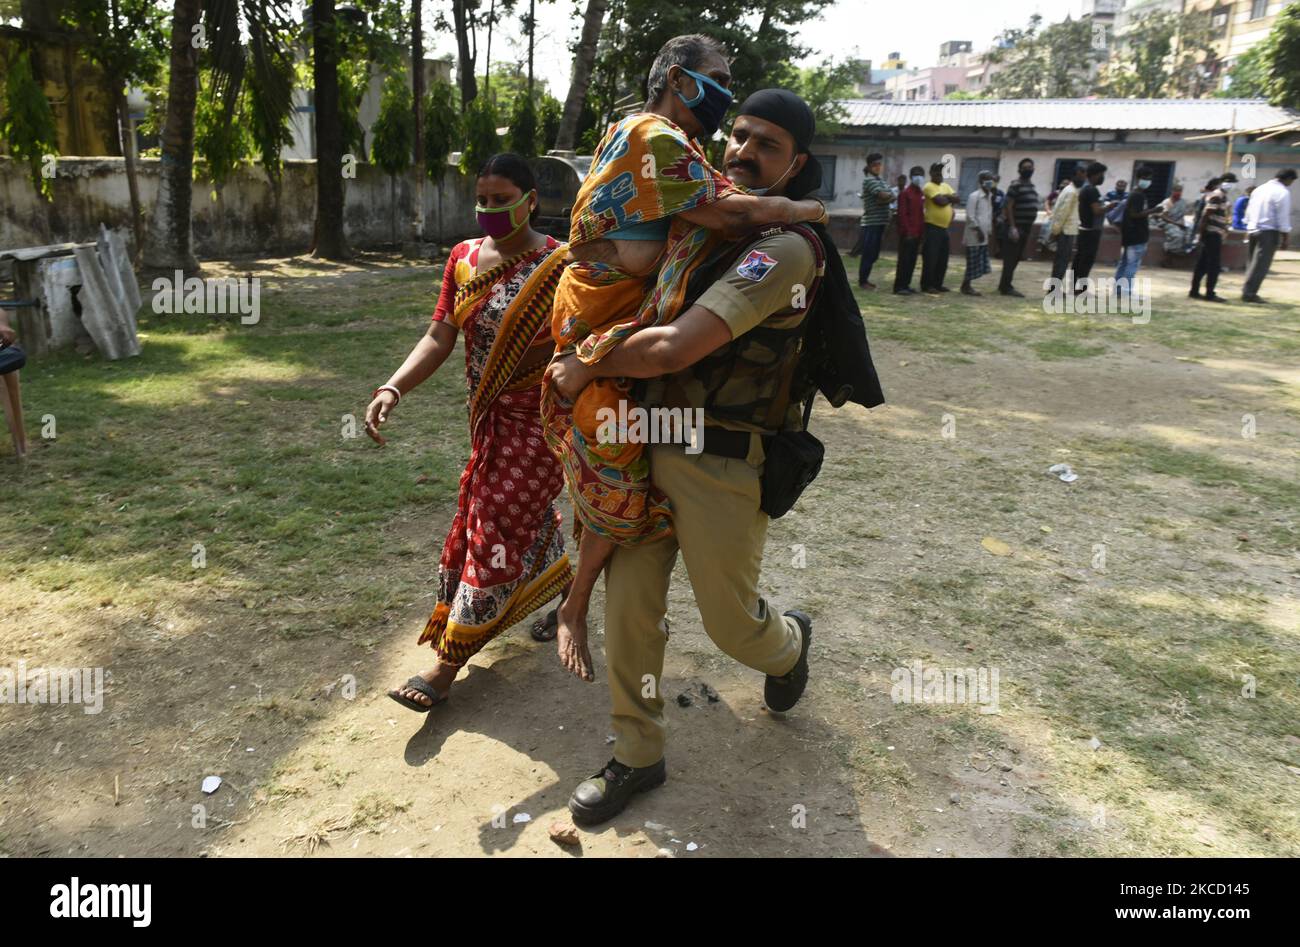 An elderly voter is assisted by a paramilitary personnel after casting her vote at a polling station during the Fifth phase West Bengal assembly election in Kolkata, India, 17 April, 2021. Election Commission has decided to ban rallies, public meeting and streets play in poll-bound West Bengal from 7 pm to 10 am due to the Covid-19 spike in India according to an Indian media report. (Photo by Indranil Aditya/NurPhoto) Stock Photo